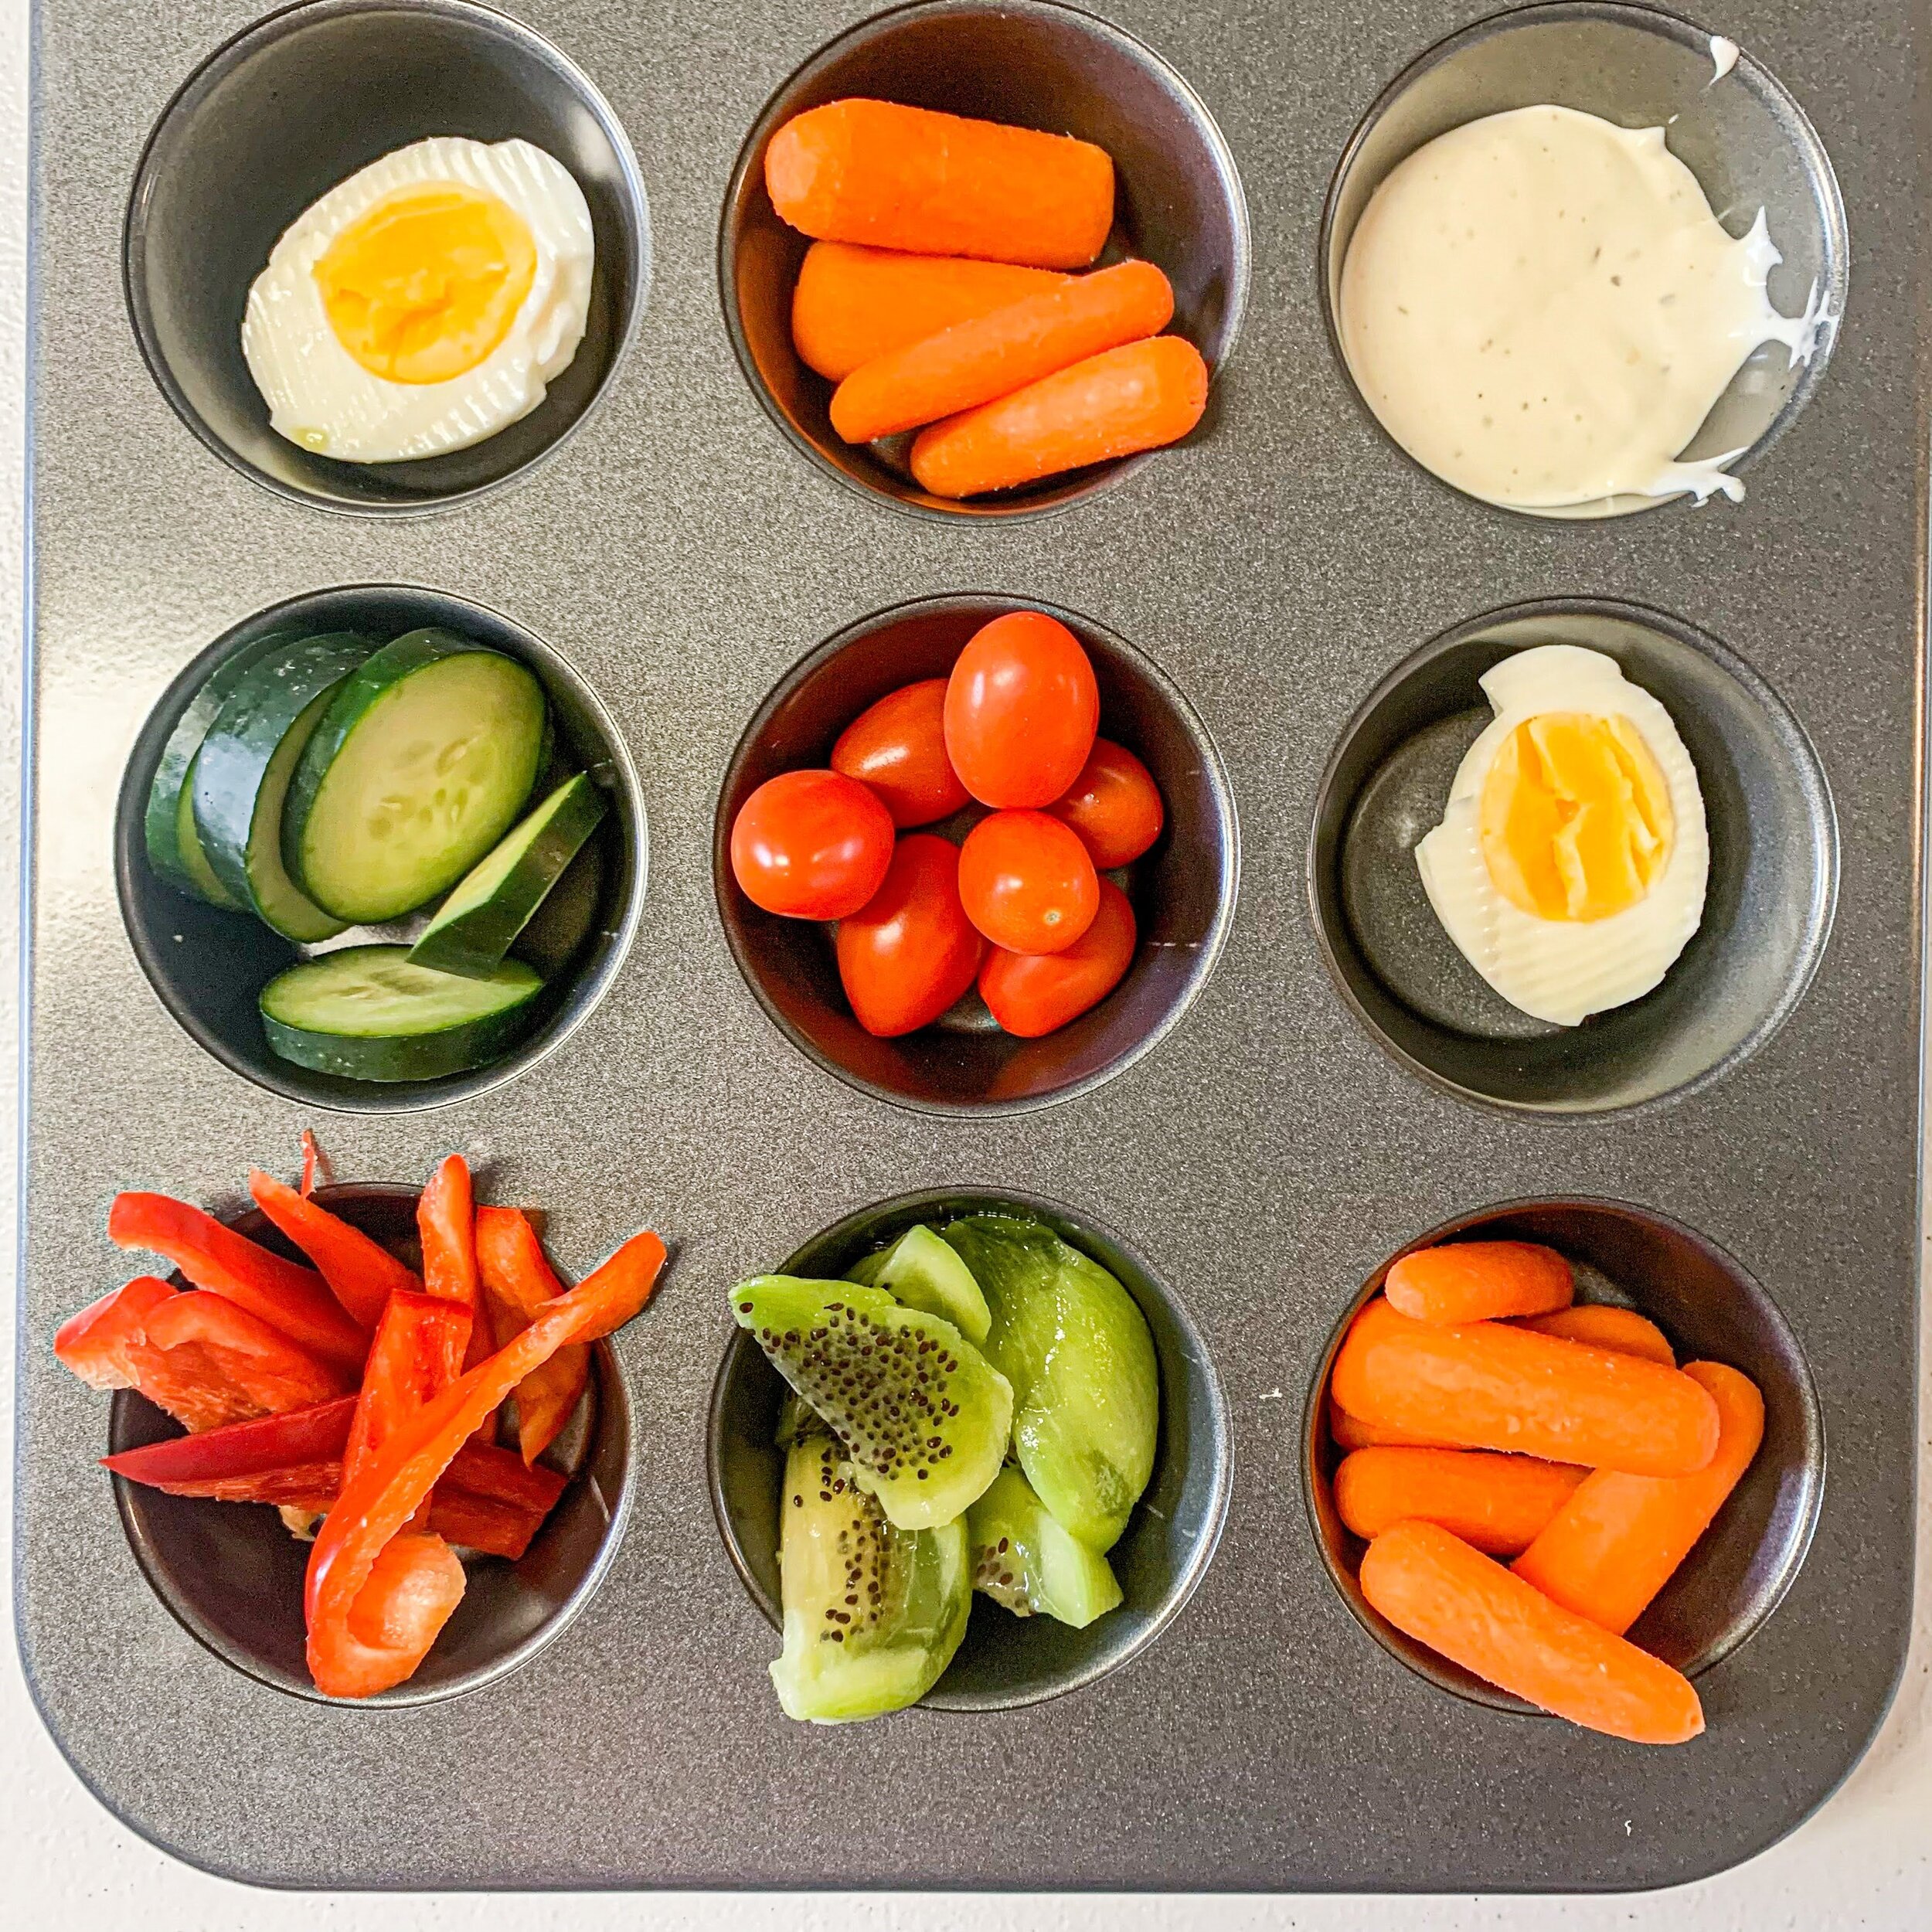 Healthy Adult Lunchables : 3 Ways - Unbound Wellness